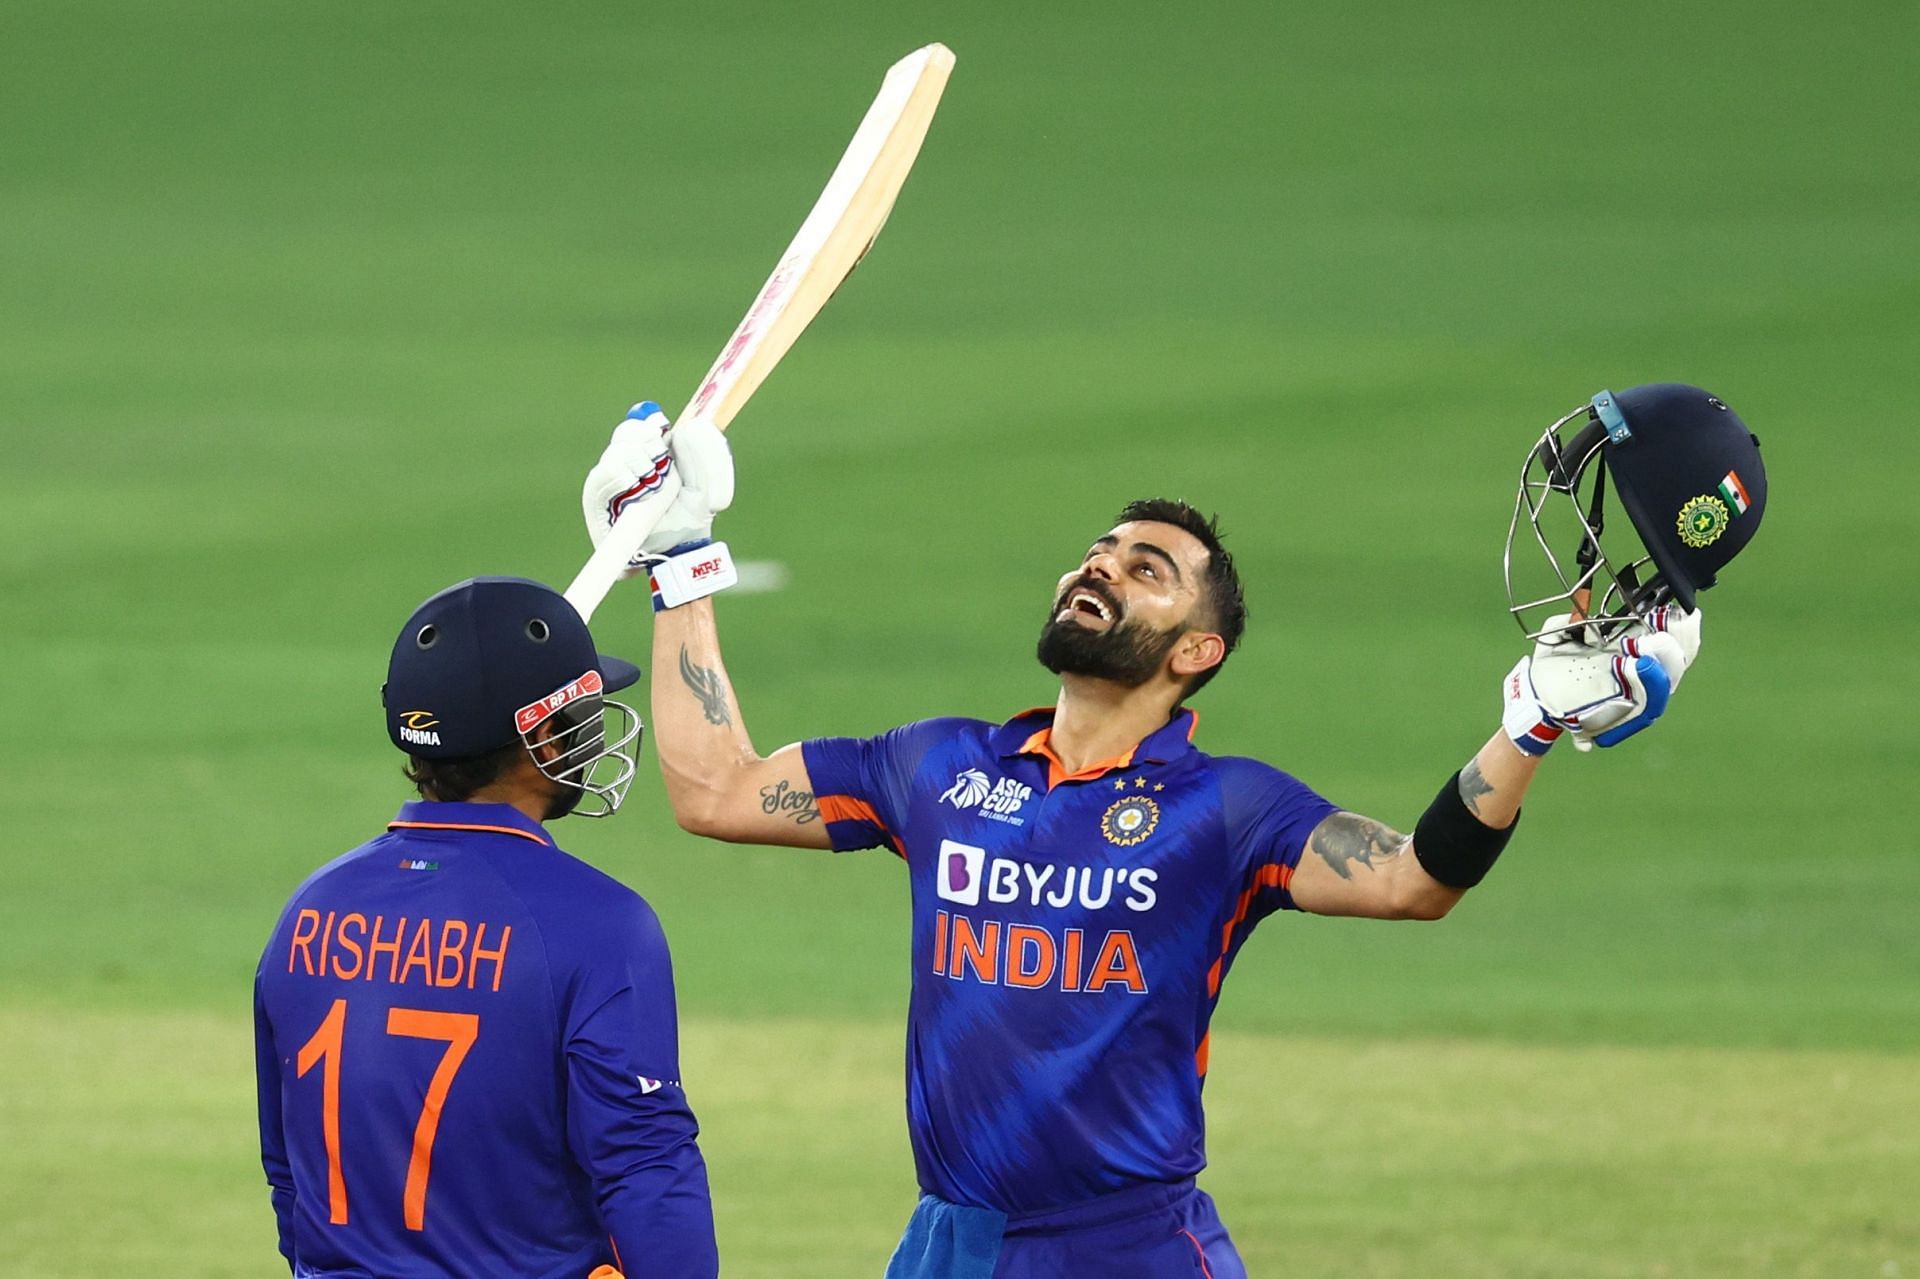 Virat Kohli scored a ton for India during their Asia Cup 2022 clash against Afghanistan.